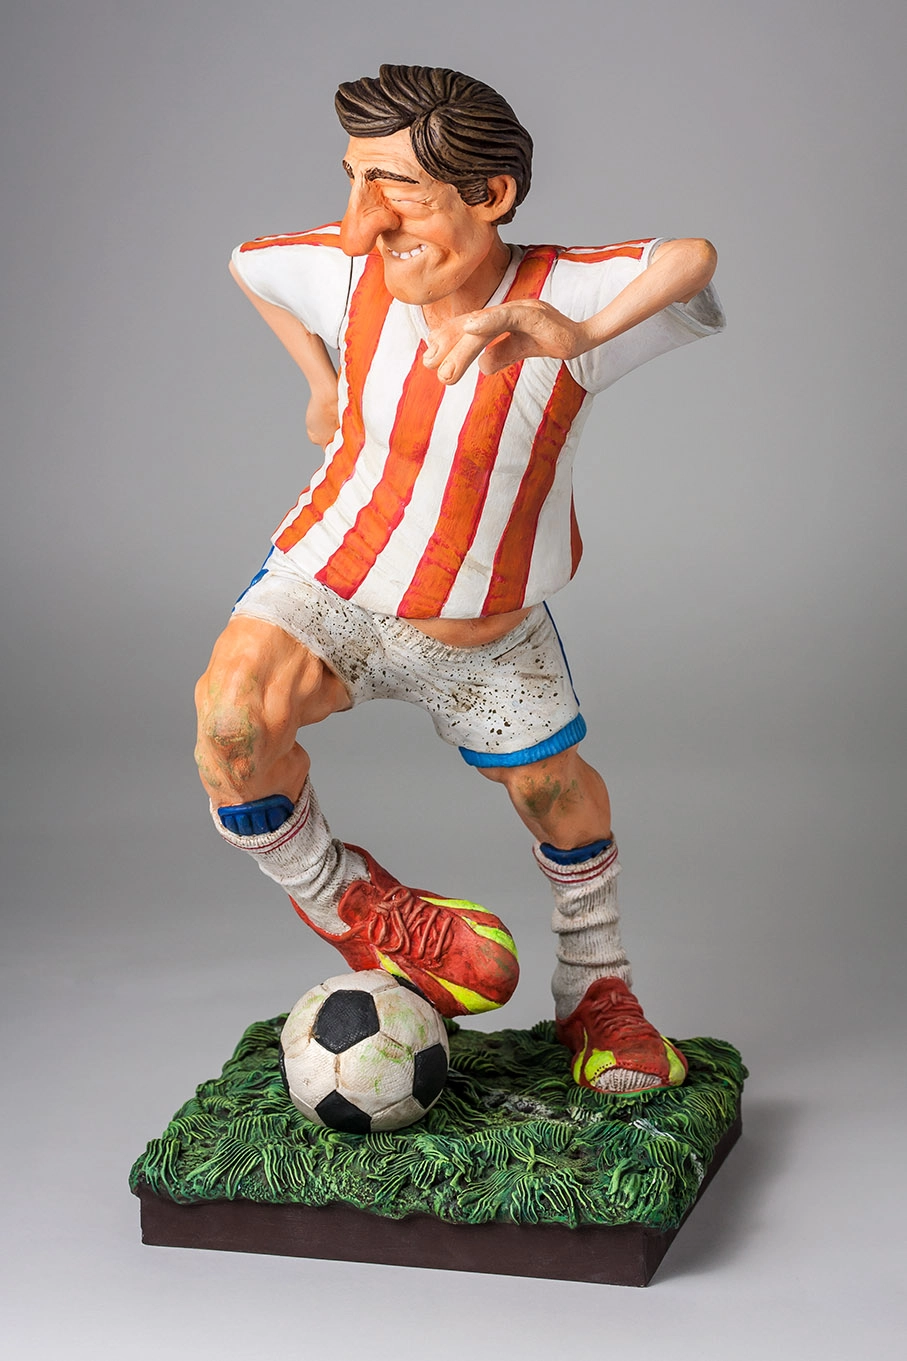 Guillermo Forchino The Football/Soccer Player 1/2 scale Comical Art Sculpture